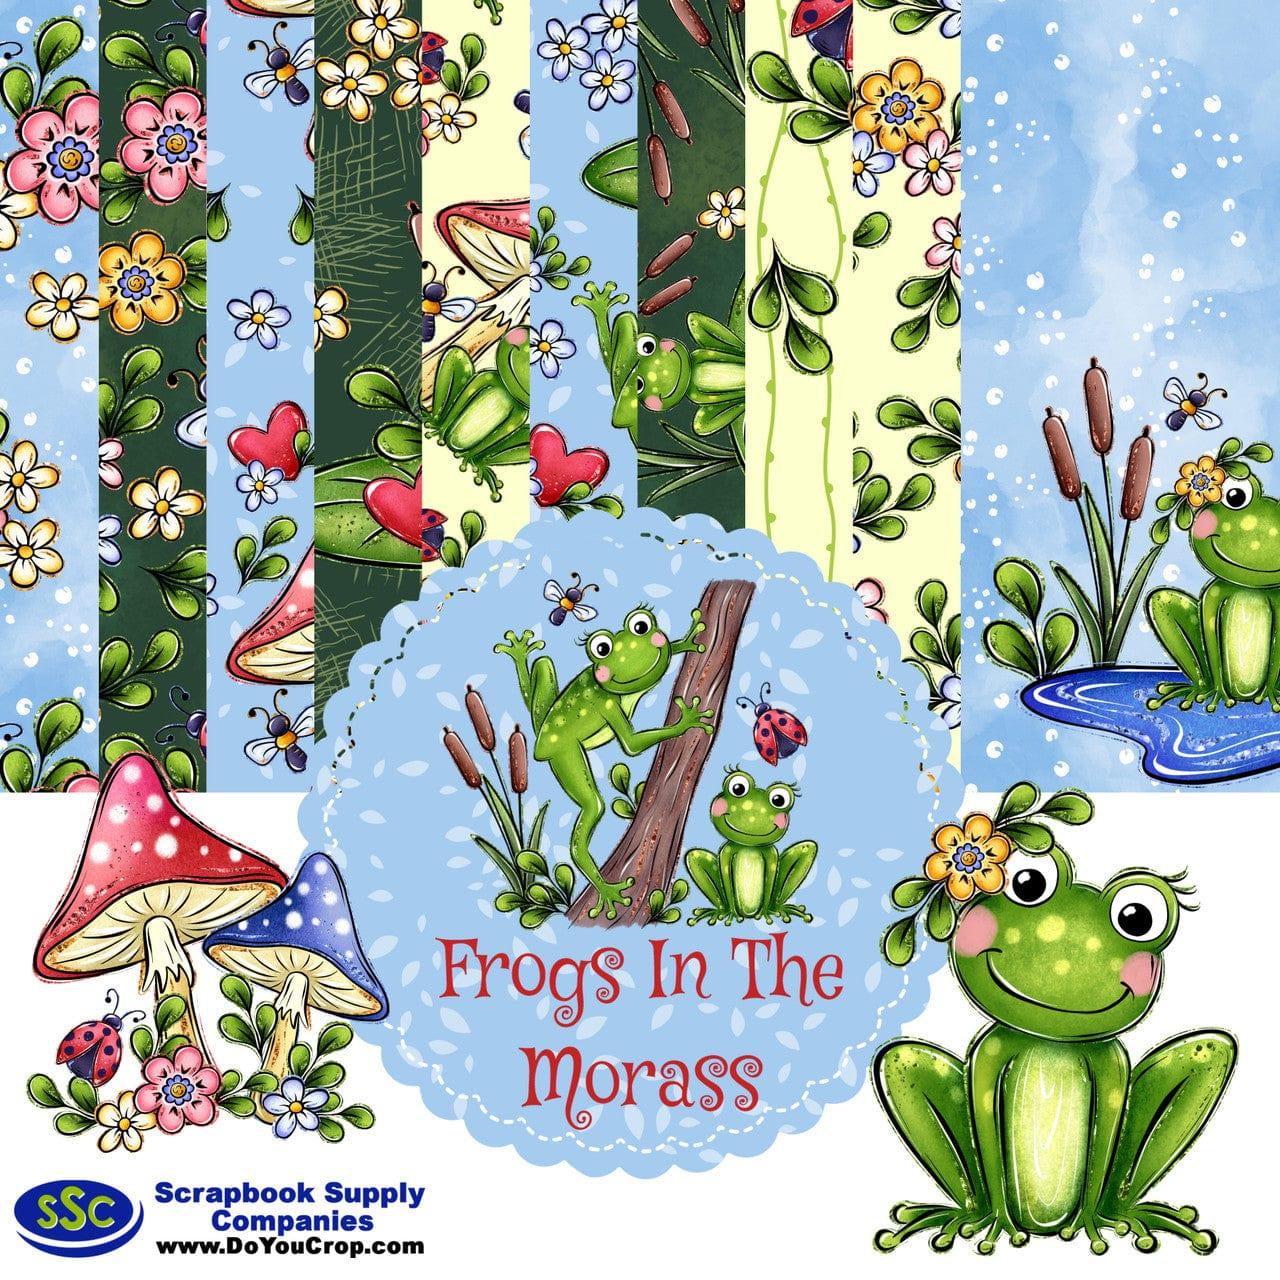 Phantasia Design's Frogs In The Morass 12 x 12 Scrapbook Paper & Embellishment Kit by SSC Designs - Scrapbook Supply Companies